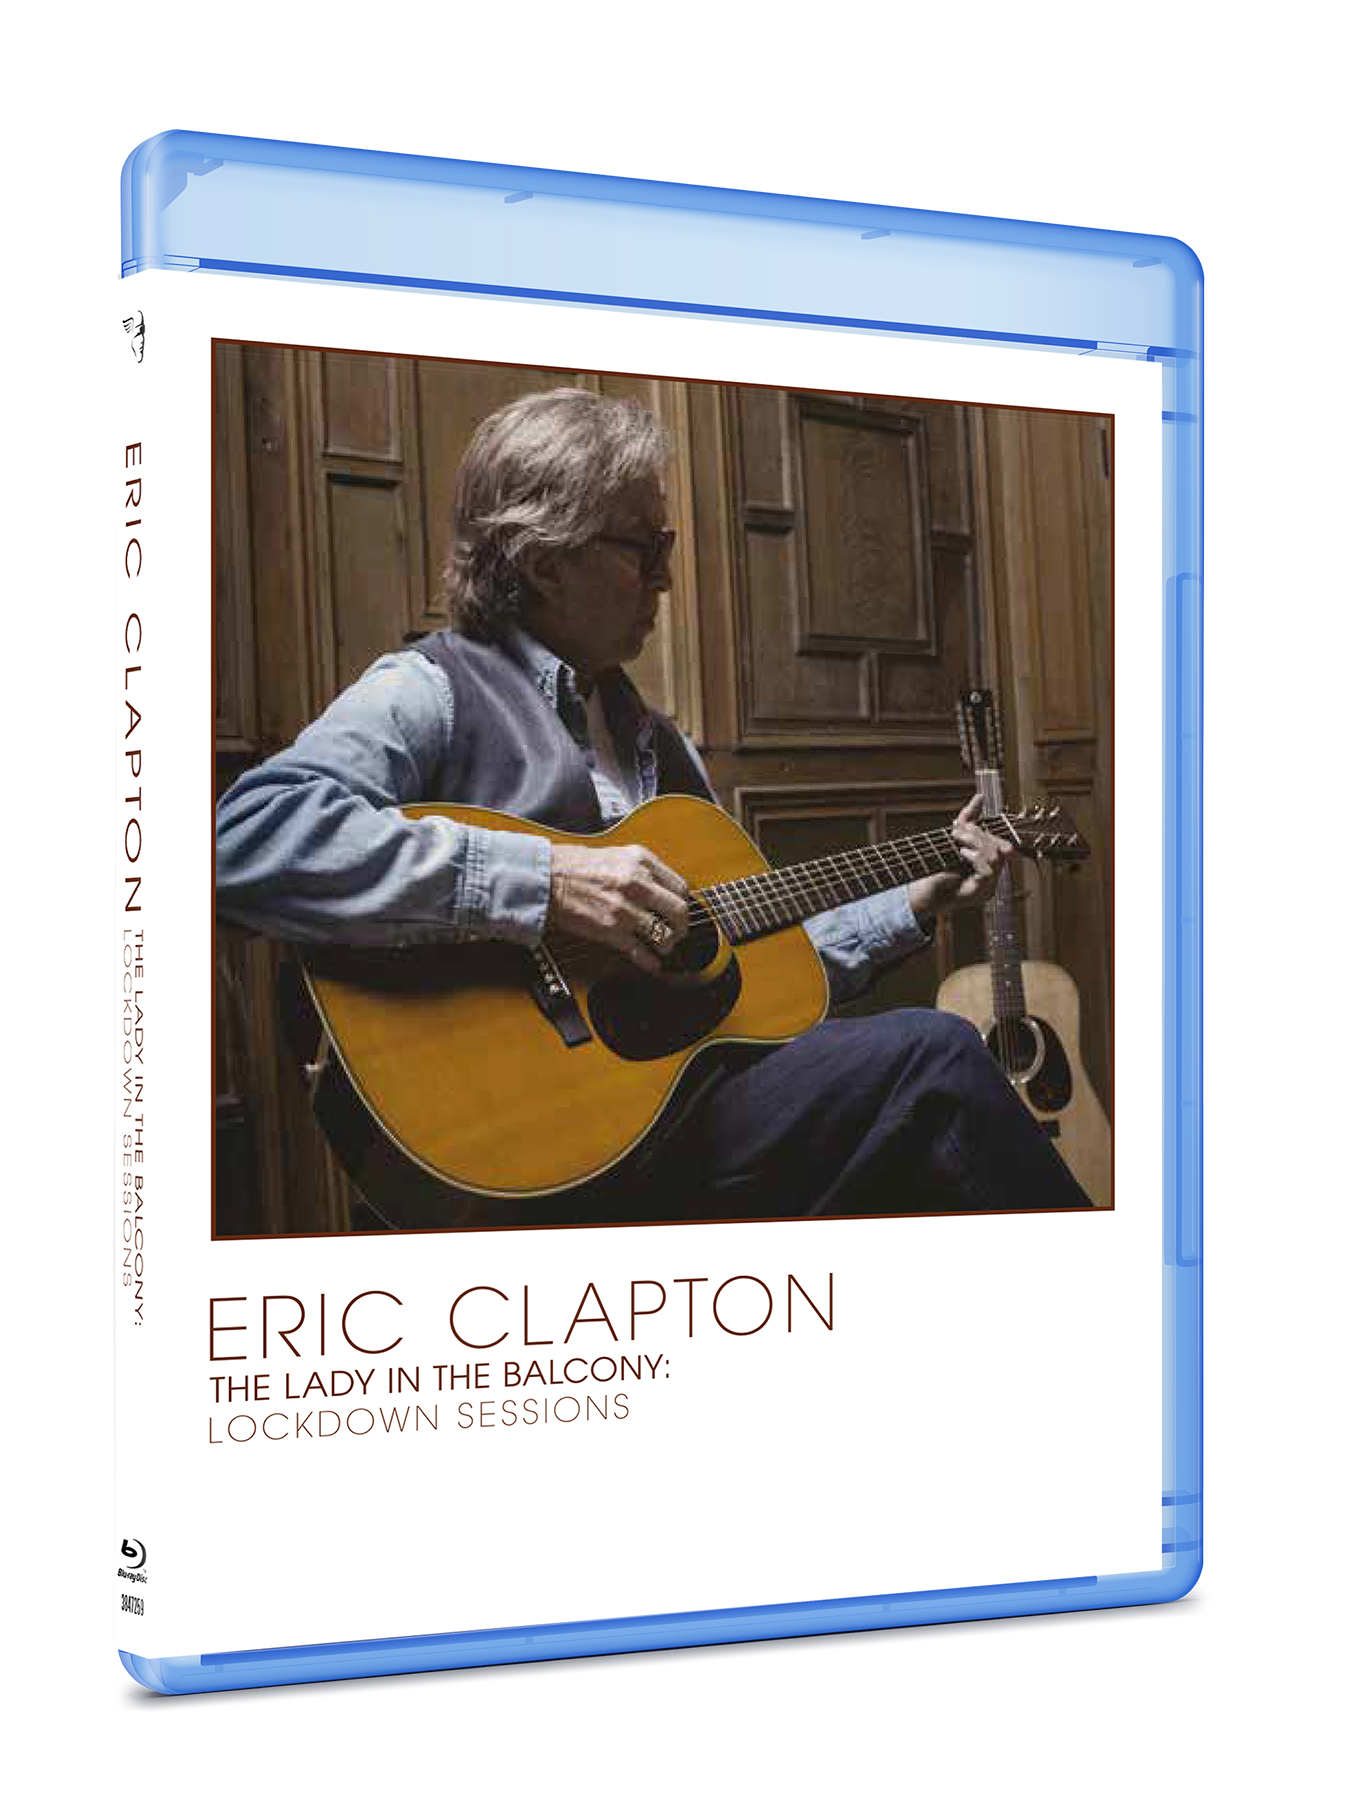 Eric Clapton - The Lady In The Balcony - Lockdown Sessions: Blu-Ray